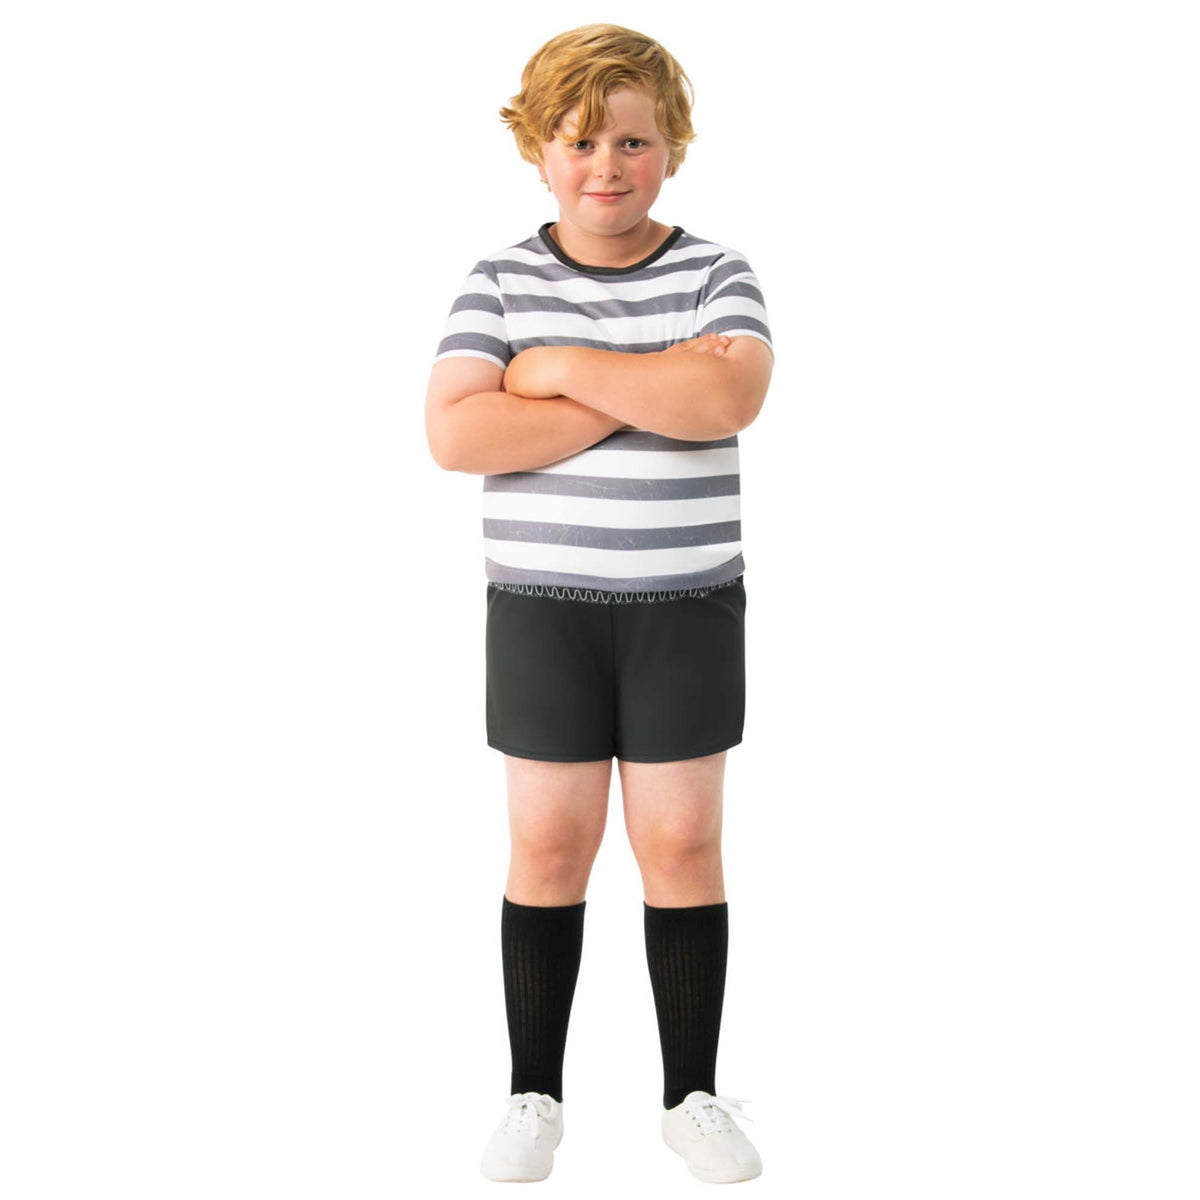 Pugsley Addams Costume for Kids, Family Addams, Shirt with Stuffed Belly